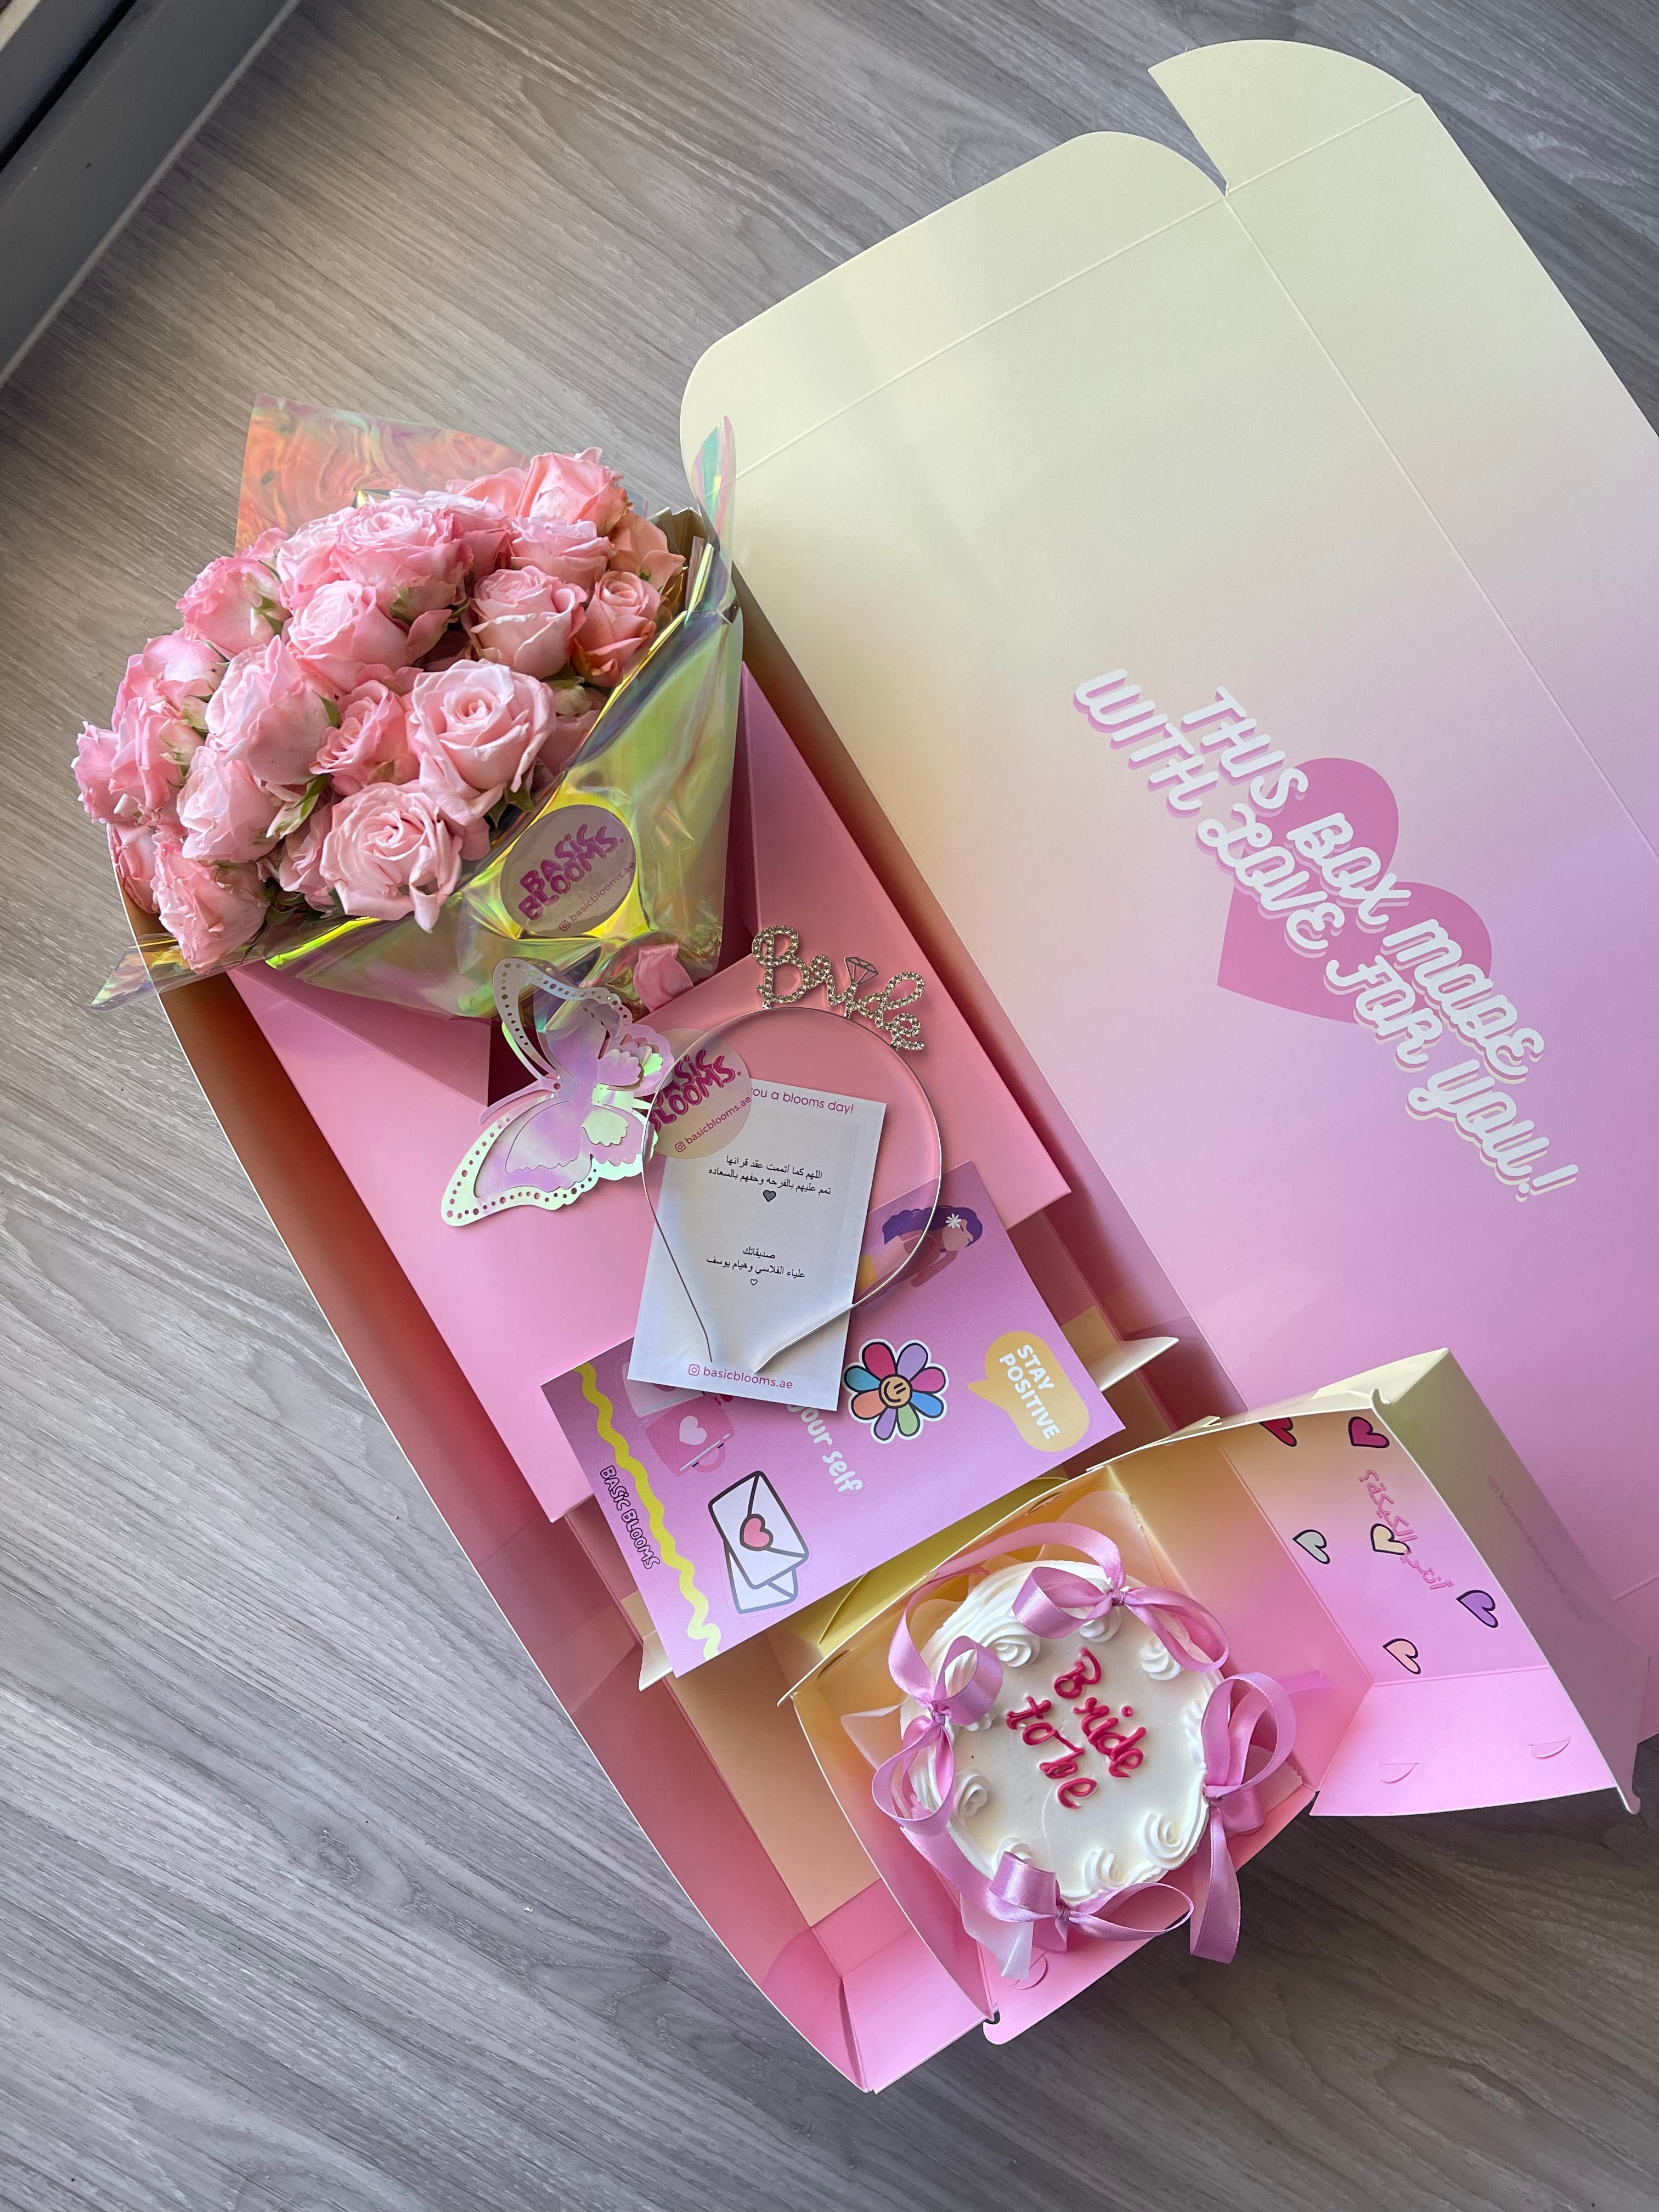 Bride to be box